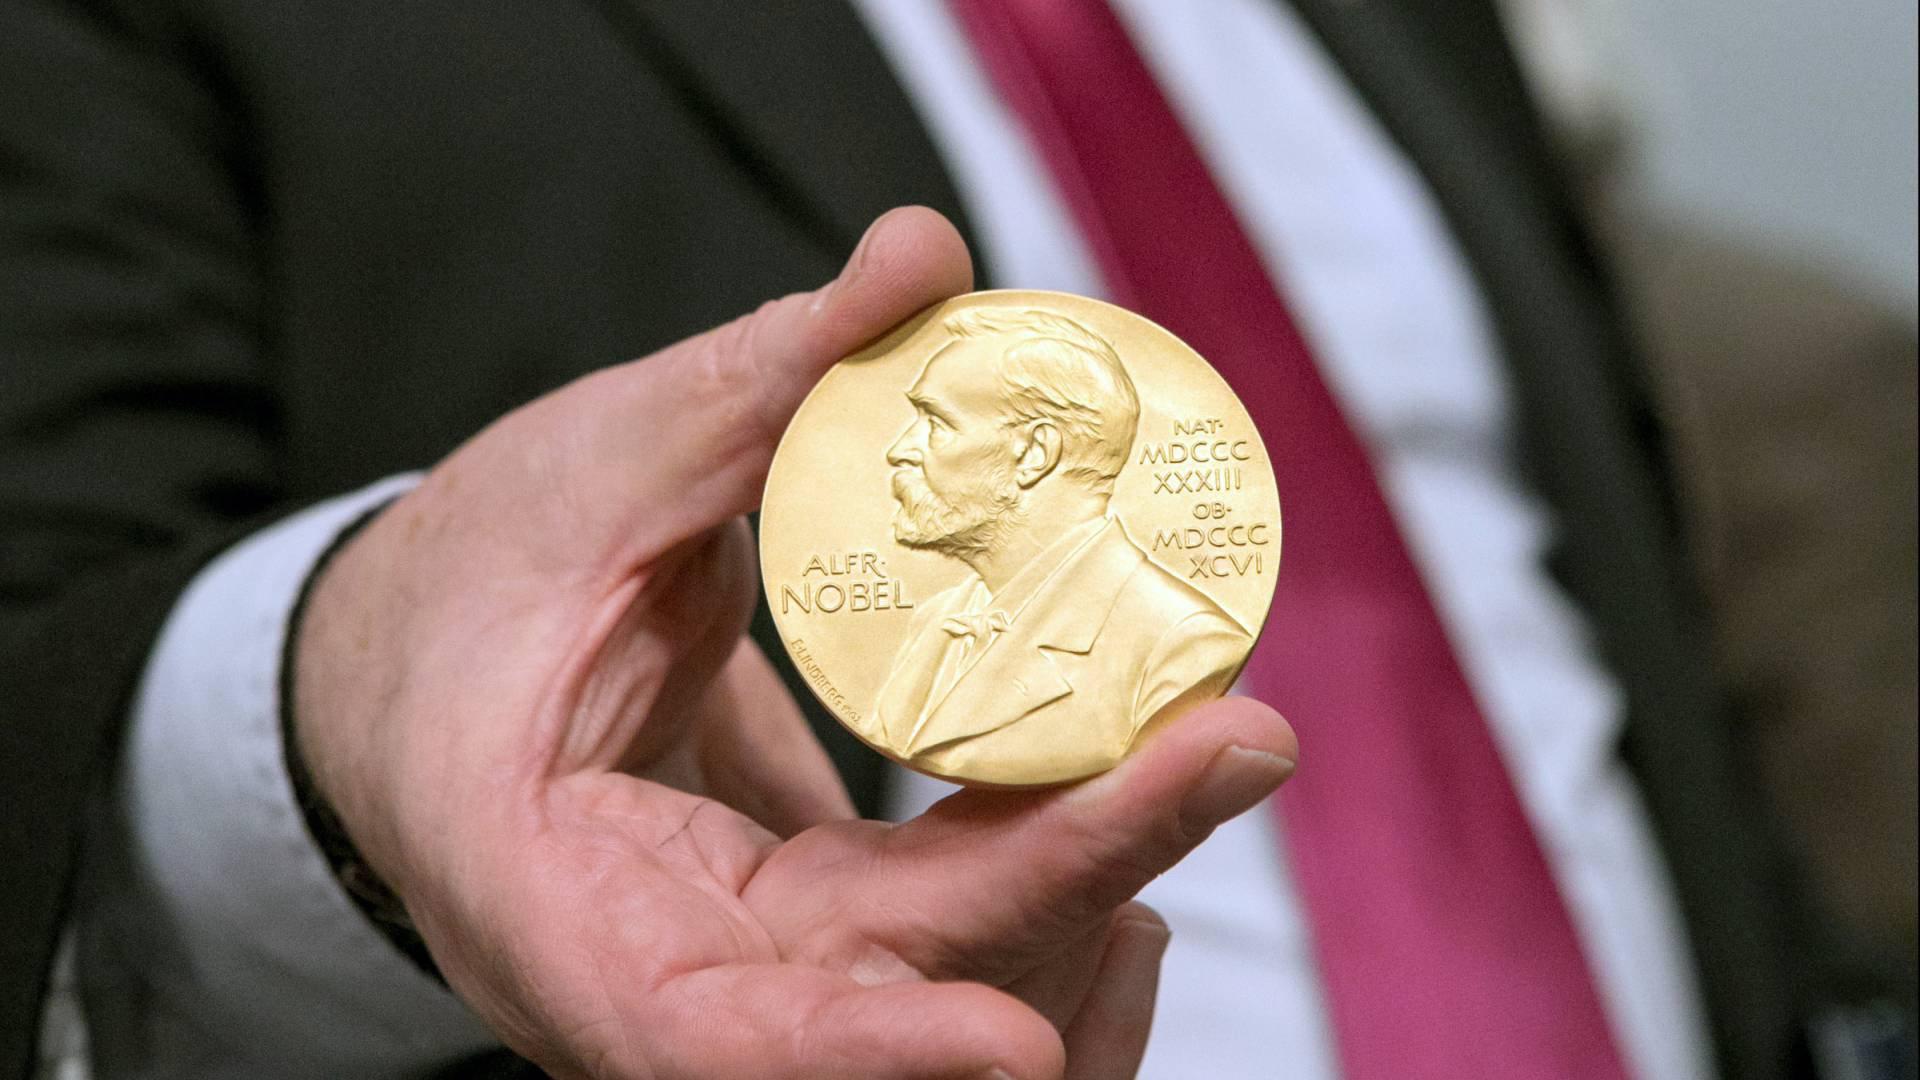 7. Since its inception, which category of the Nobel Prize has been awarded every single year?